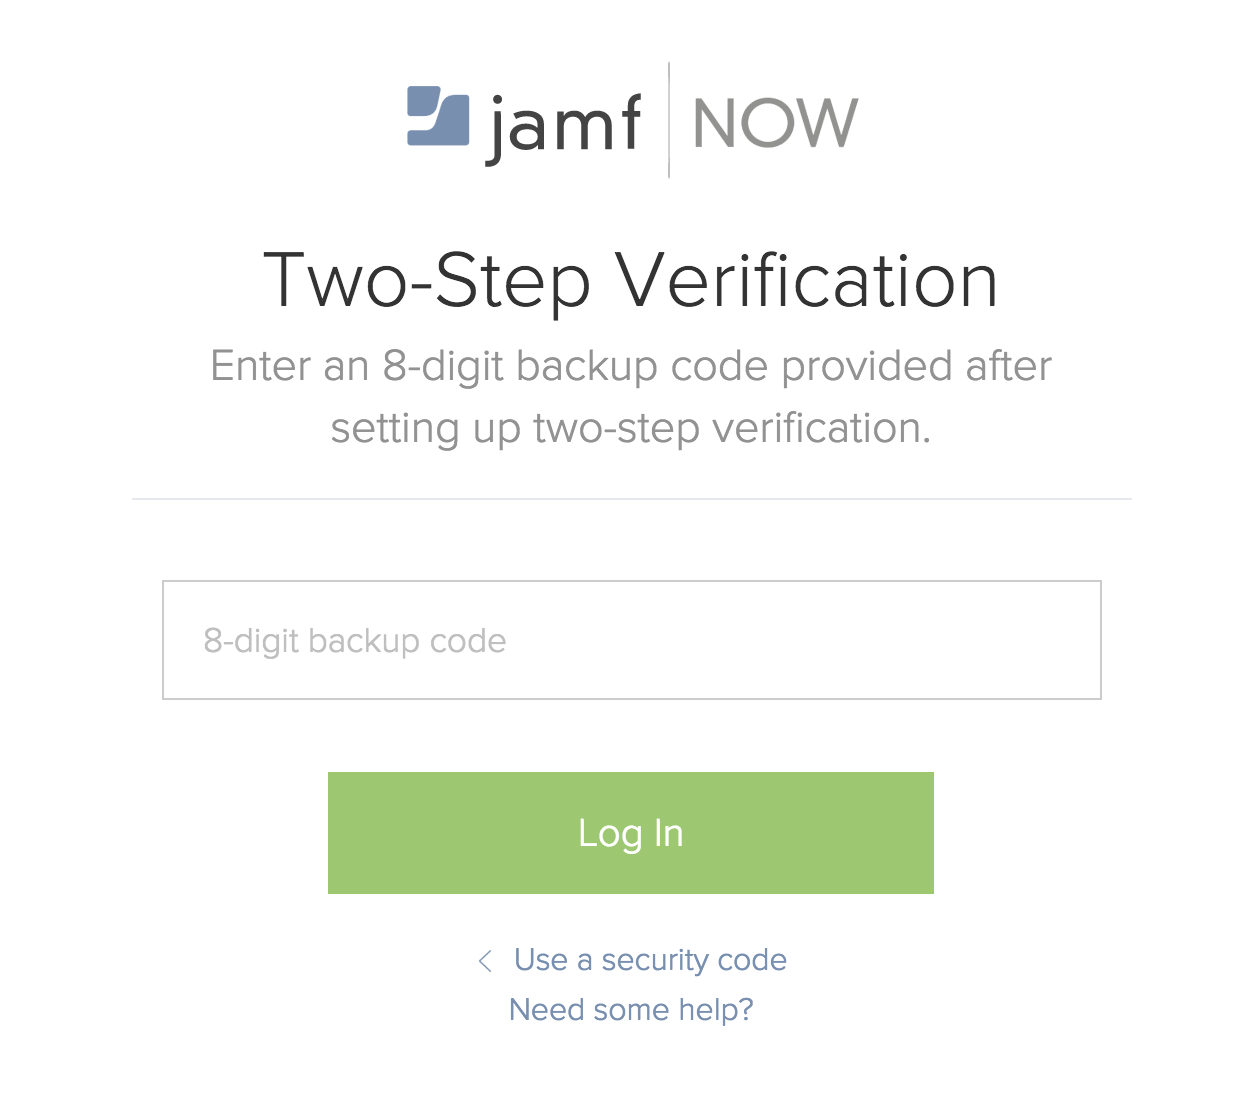 Screenshot of Two-Step Verification, with a field to enter an 8-digit backup code.